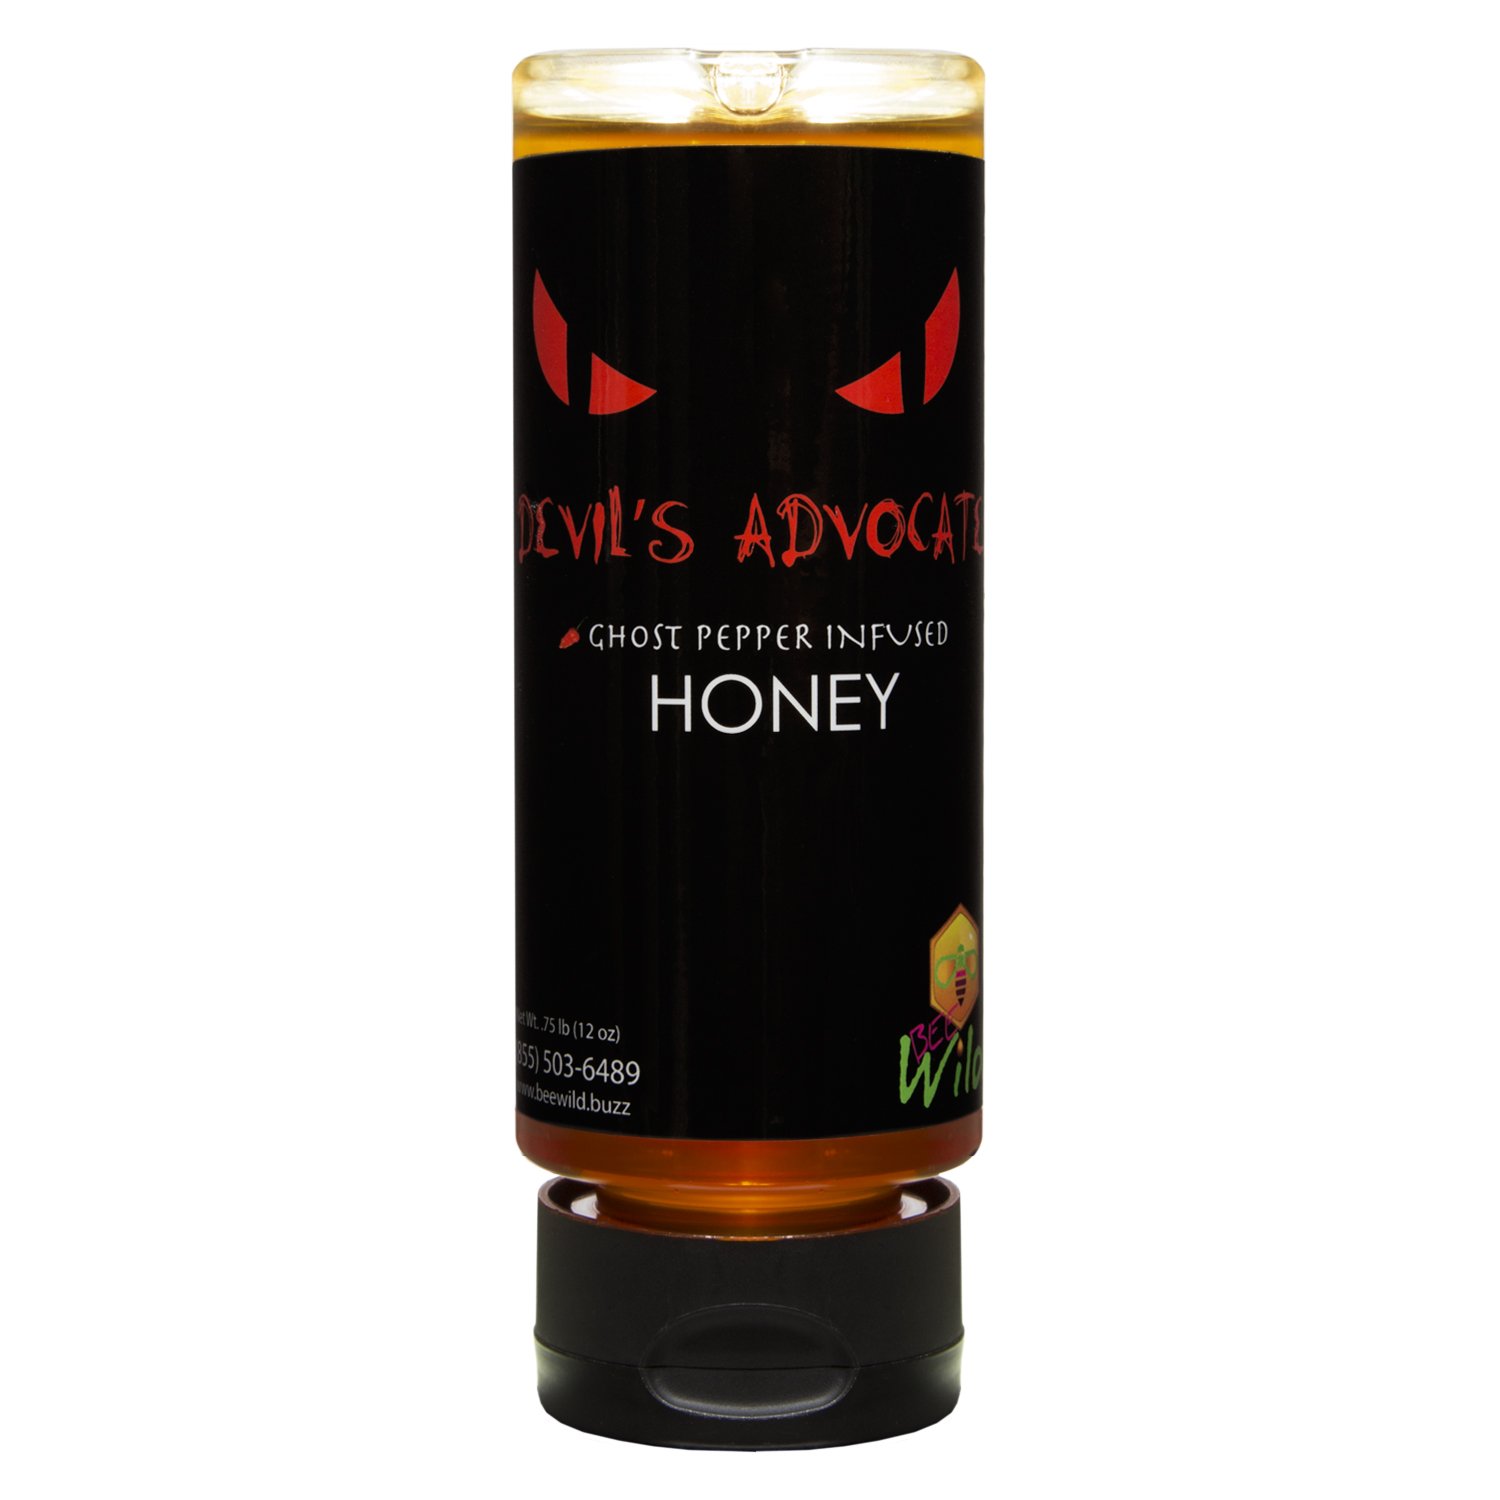 Bee Wild's ghost pepper-infused "Devil's Advocate" honey will light up anyone's tastebuds. ($15 per 12-ounce squeeze bottle)